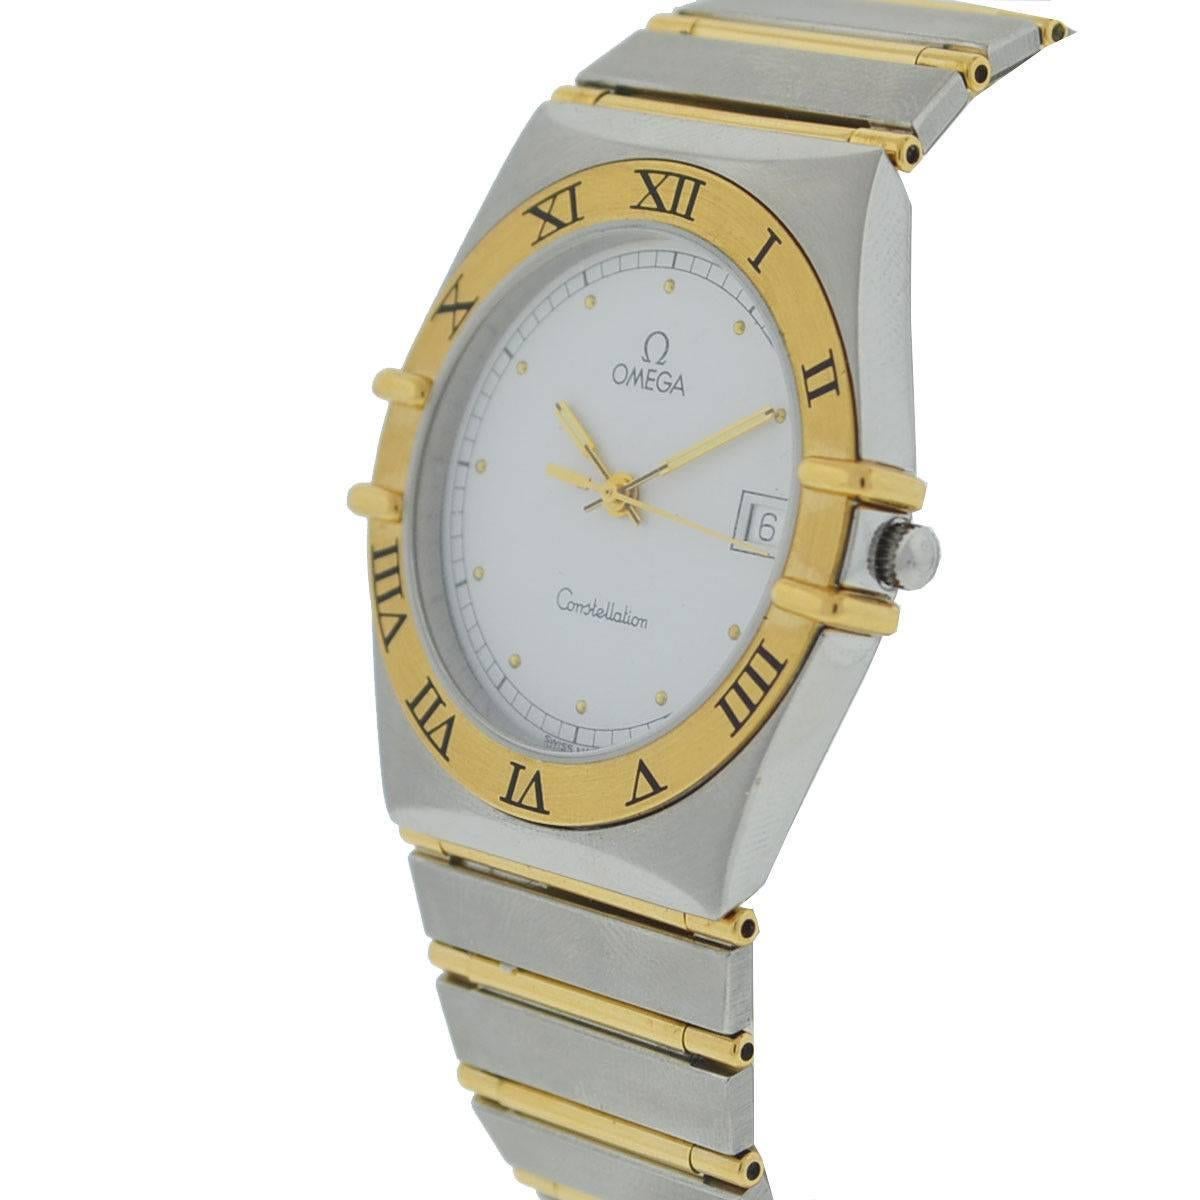 Company - Omega
Style - Dress/Formal
Model - Constellation
Reference Number - n/a
Case Metal - Two Tone
Case Measurement - 34 mm 
Bracelet - Two Tone
Dial - White
Bezel - Gold
Crystal - Plastic
Movement - Automatic
Features - Hours, Minutes, and